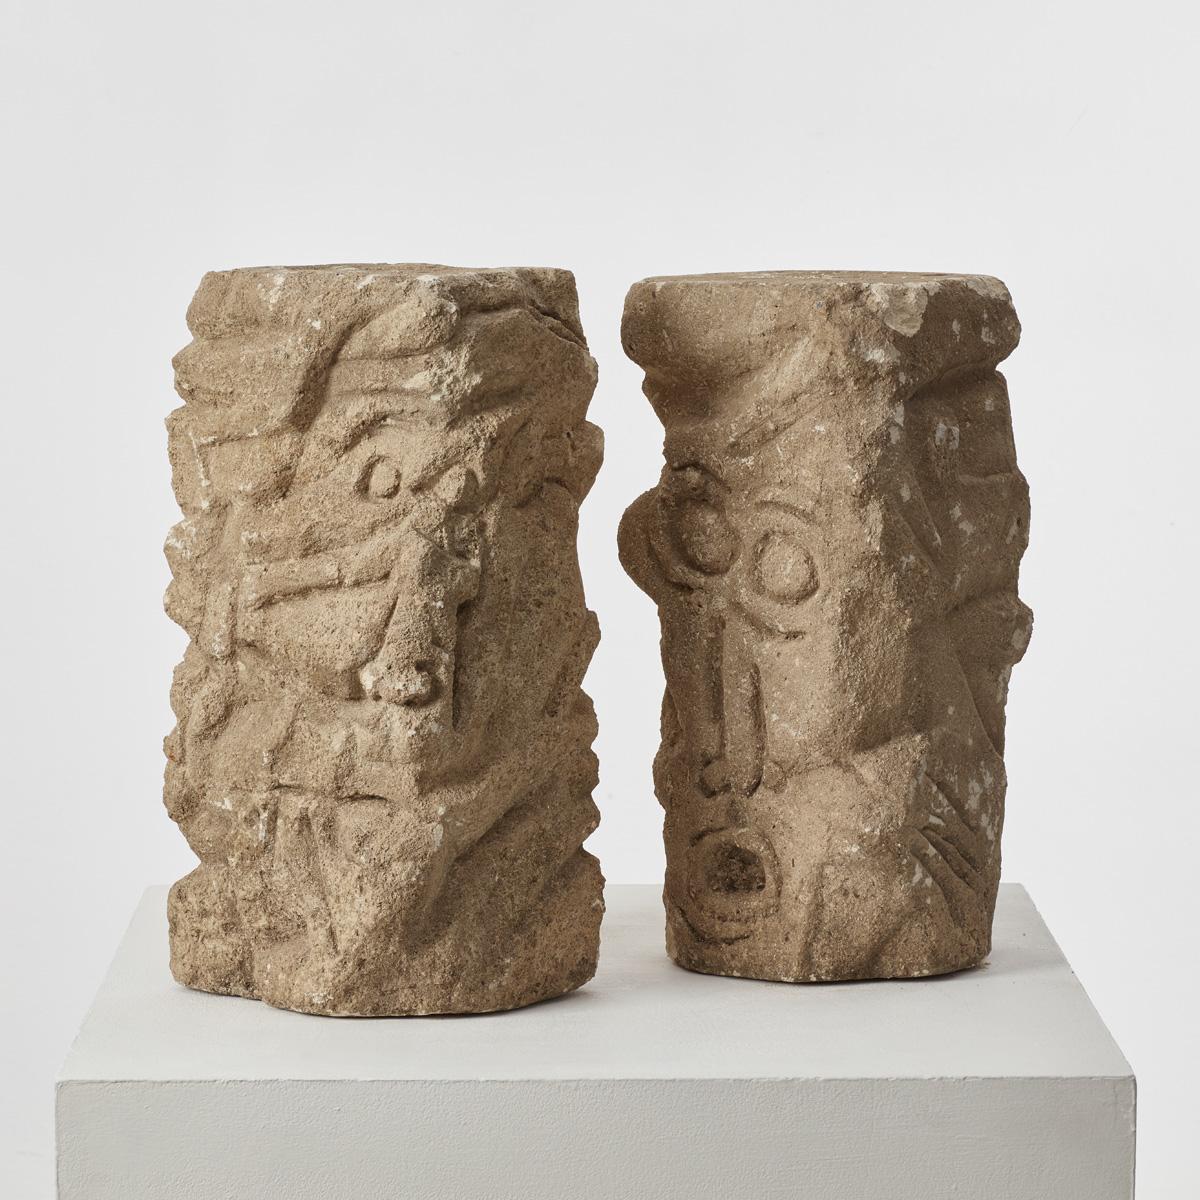 There is something both ancient and modern about this pair of sandstone sculpture. The grimacing faces that leer from the rock could be fractured elements of an archaic column, or Romanesque architectural sculpture, or works of twentieth-century